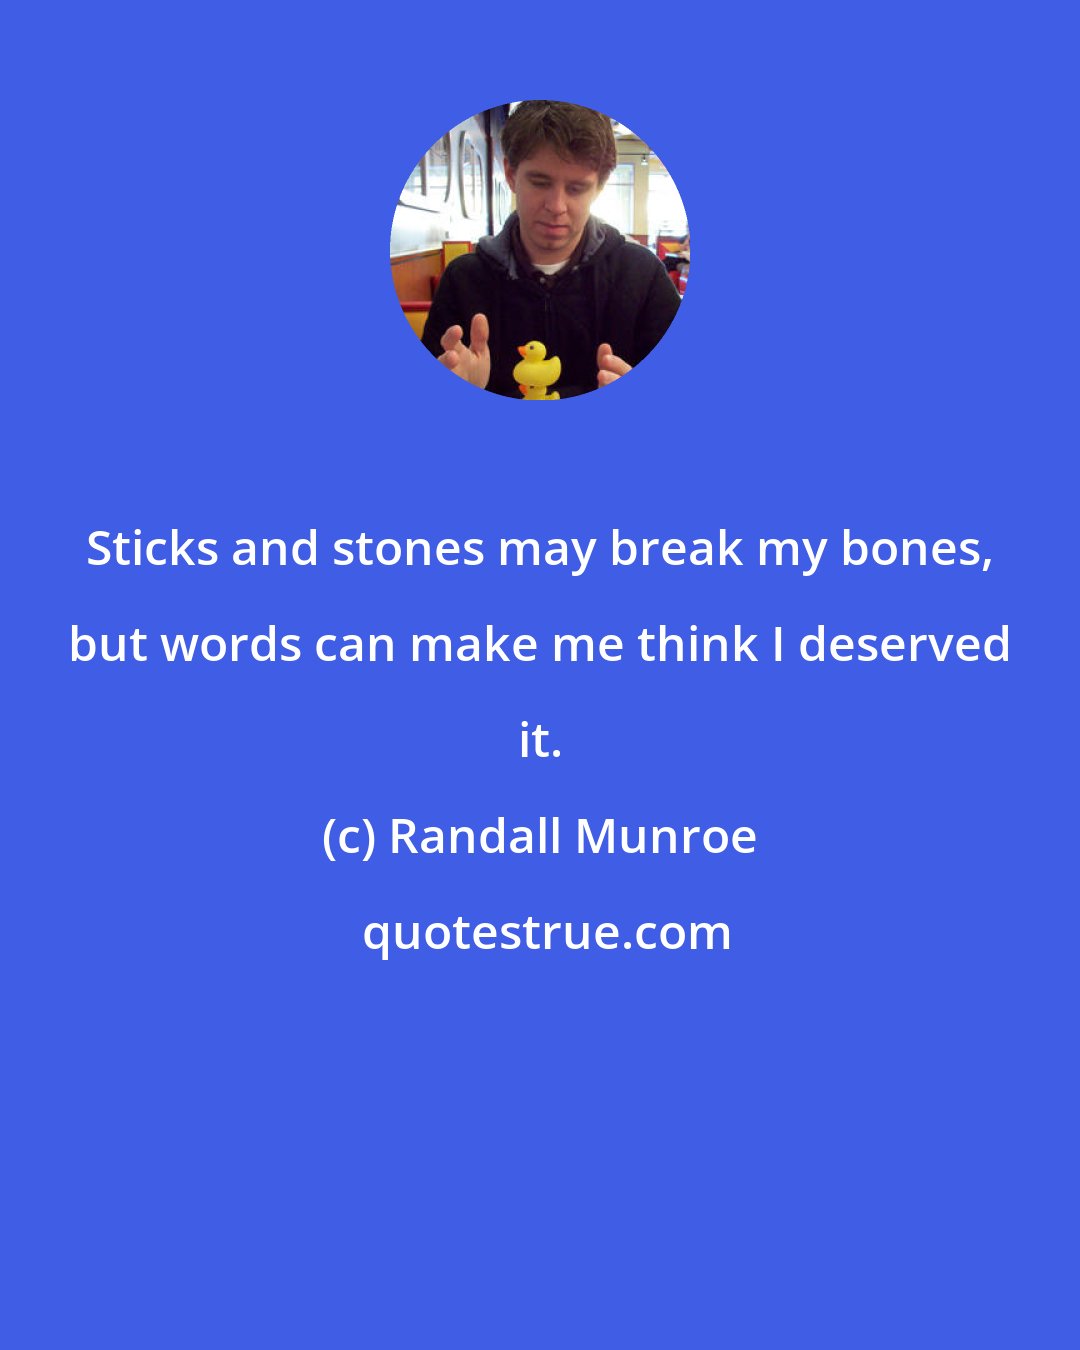 Randall Munroe: Sticks and stones may break my bones, but words can make me think I deserved it.